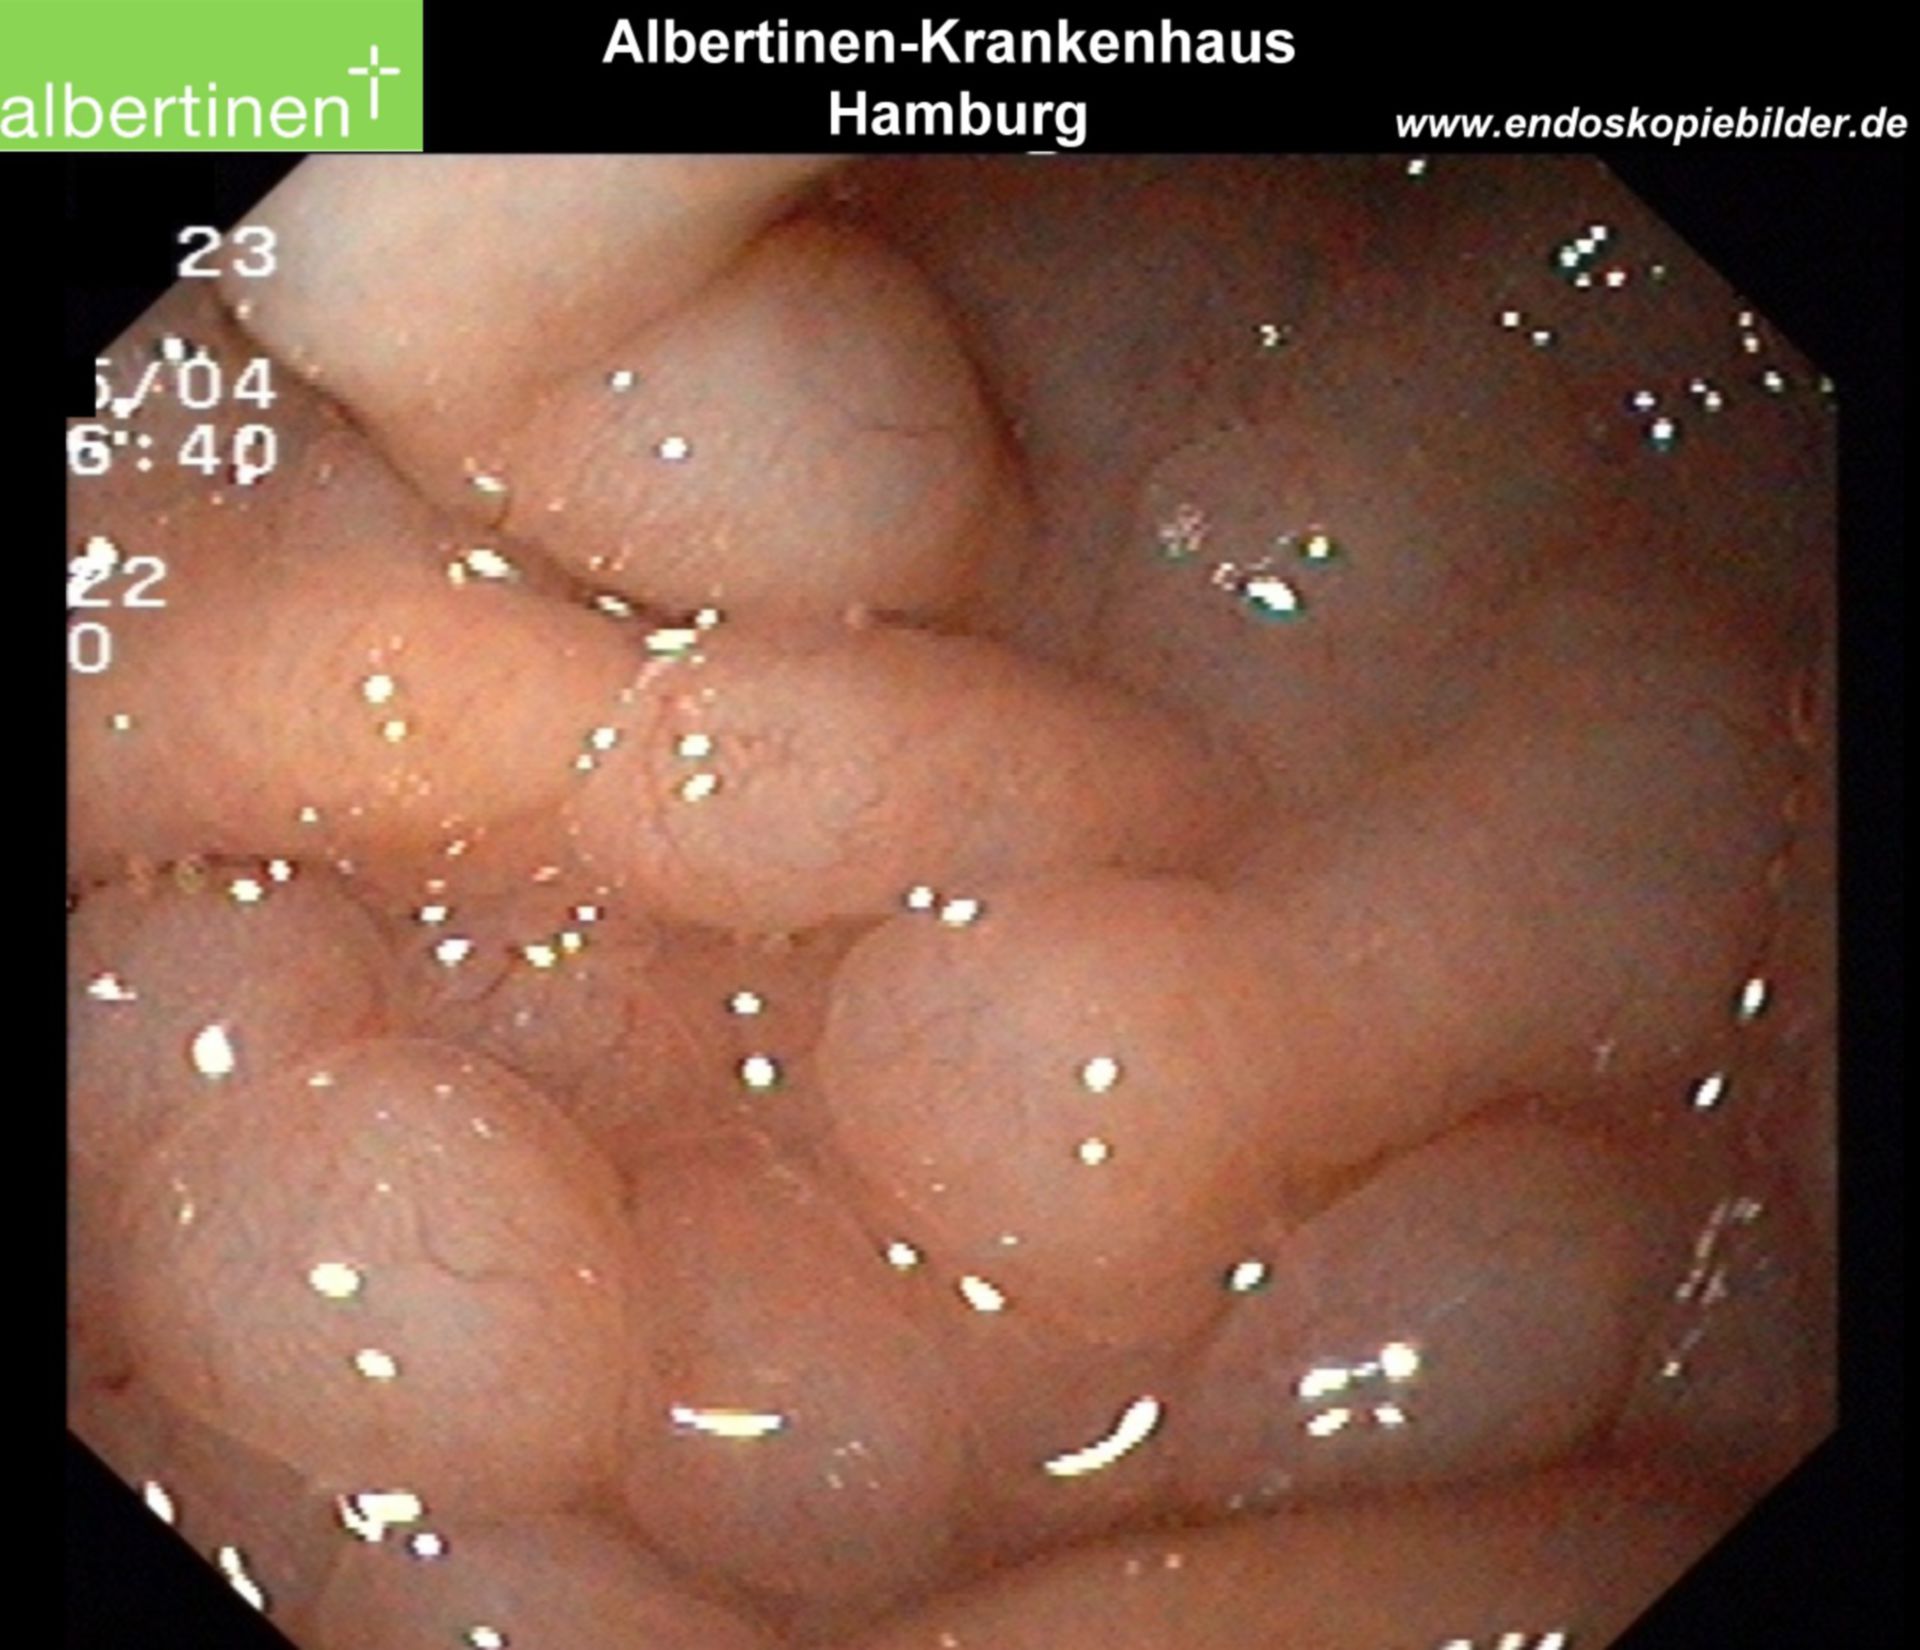 Mantle cell lymphoma with manifestation close to the stomach